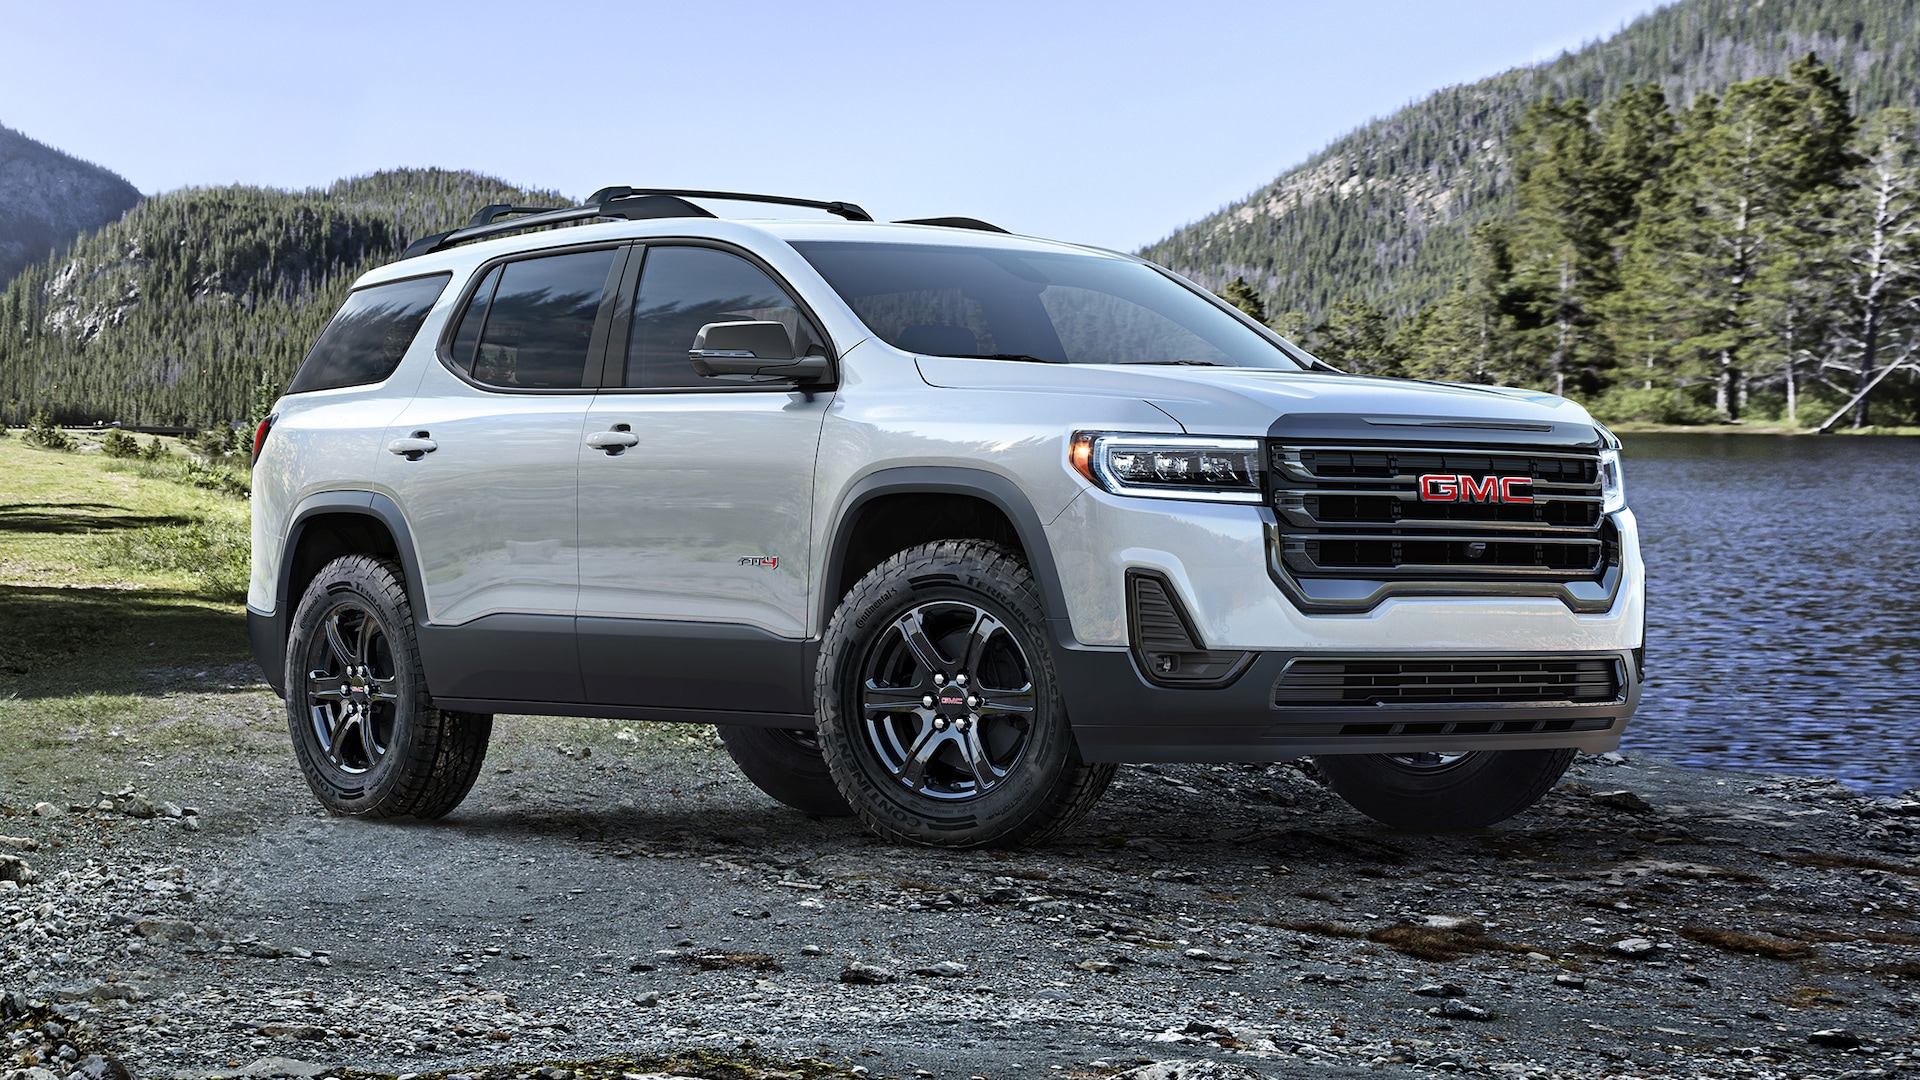 2020 GMC Acadia AT4 Off-Road Review: Looking the Part